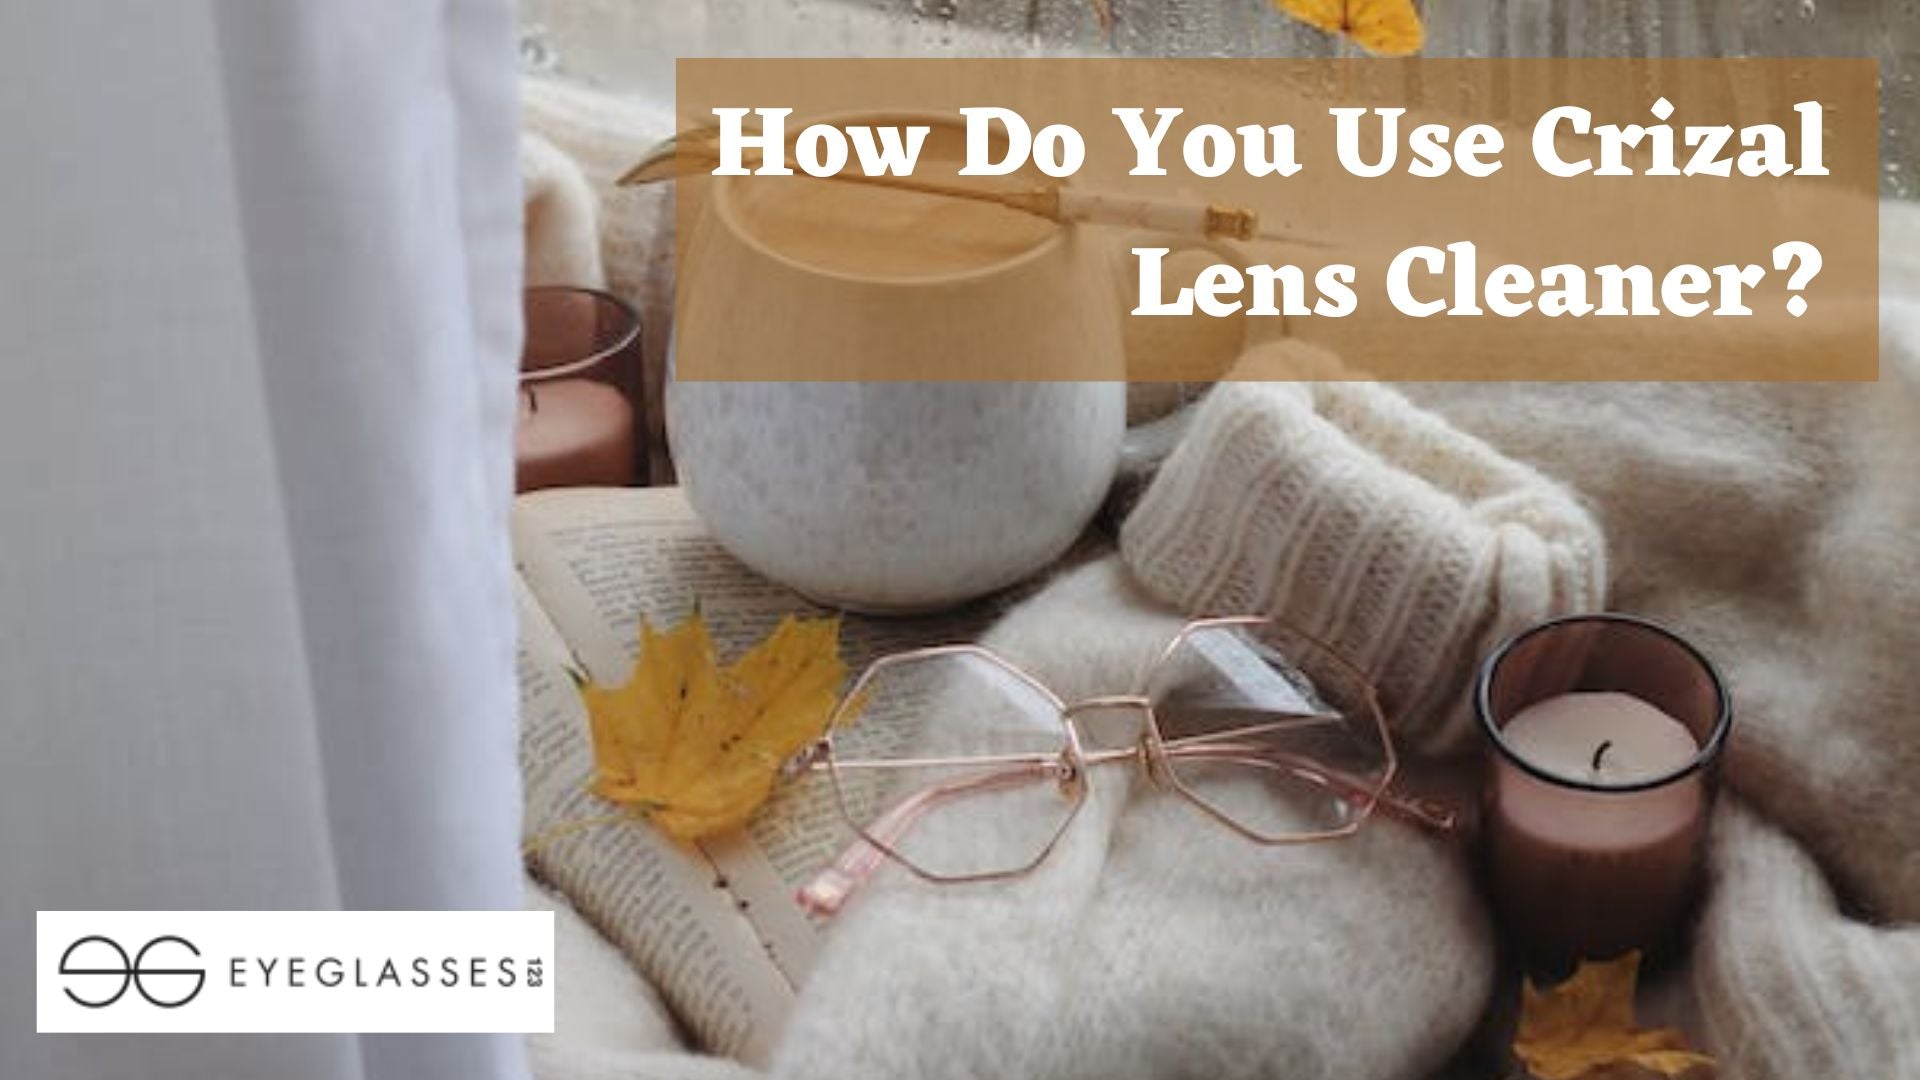 How Do You Use Crizal Lens Cleaner?